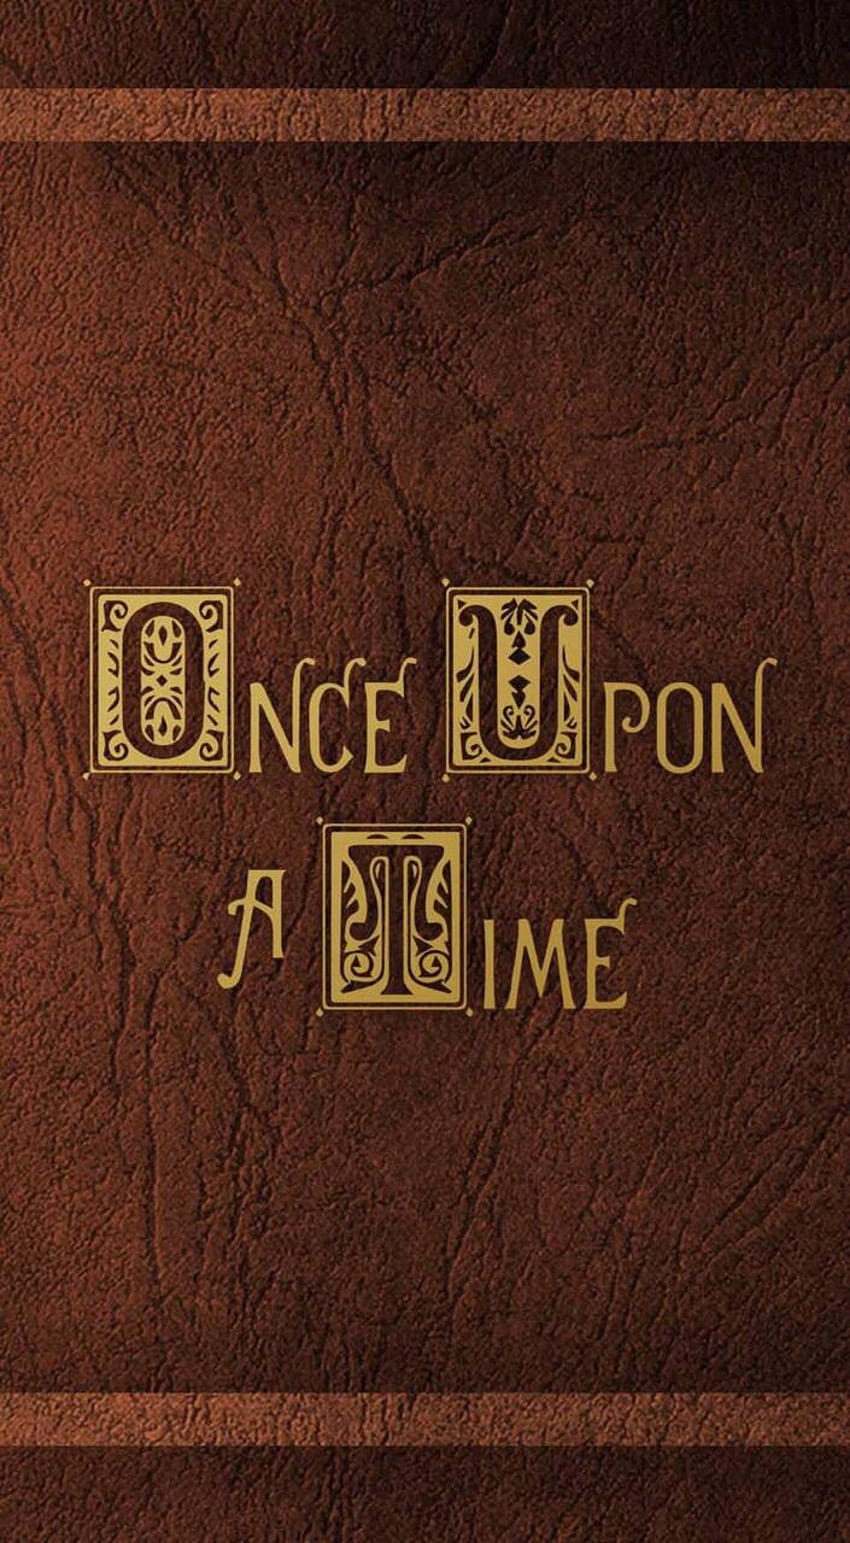 60 Once Upon A Time HD Wallpapers and Backgrounds